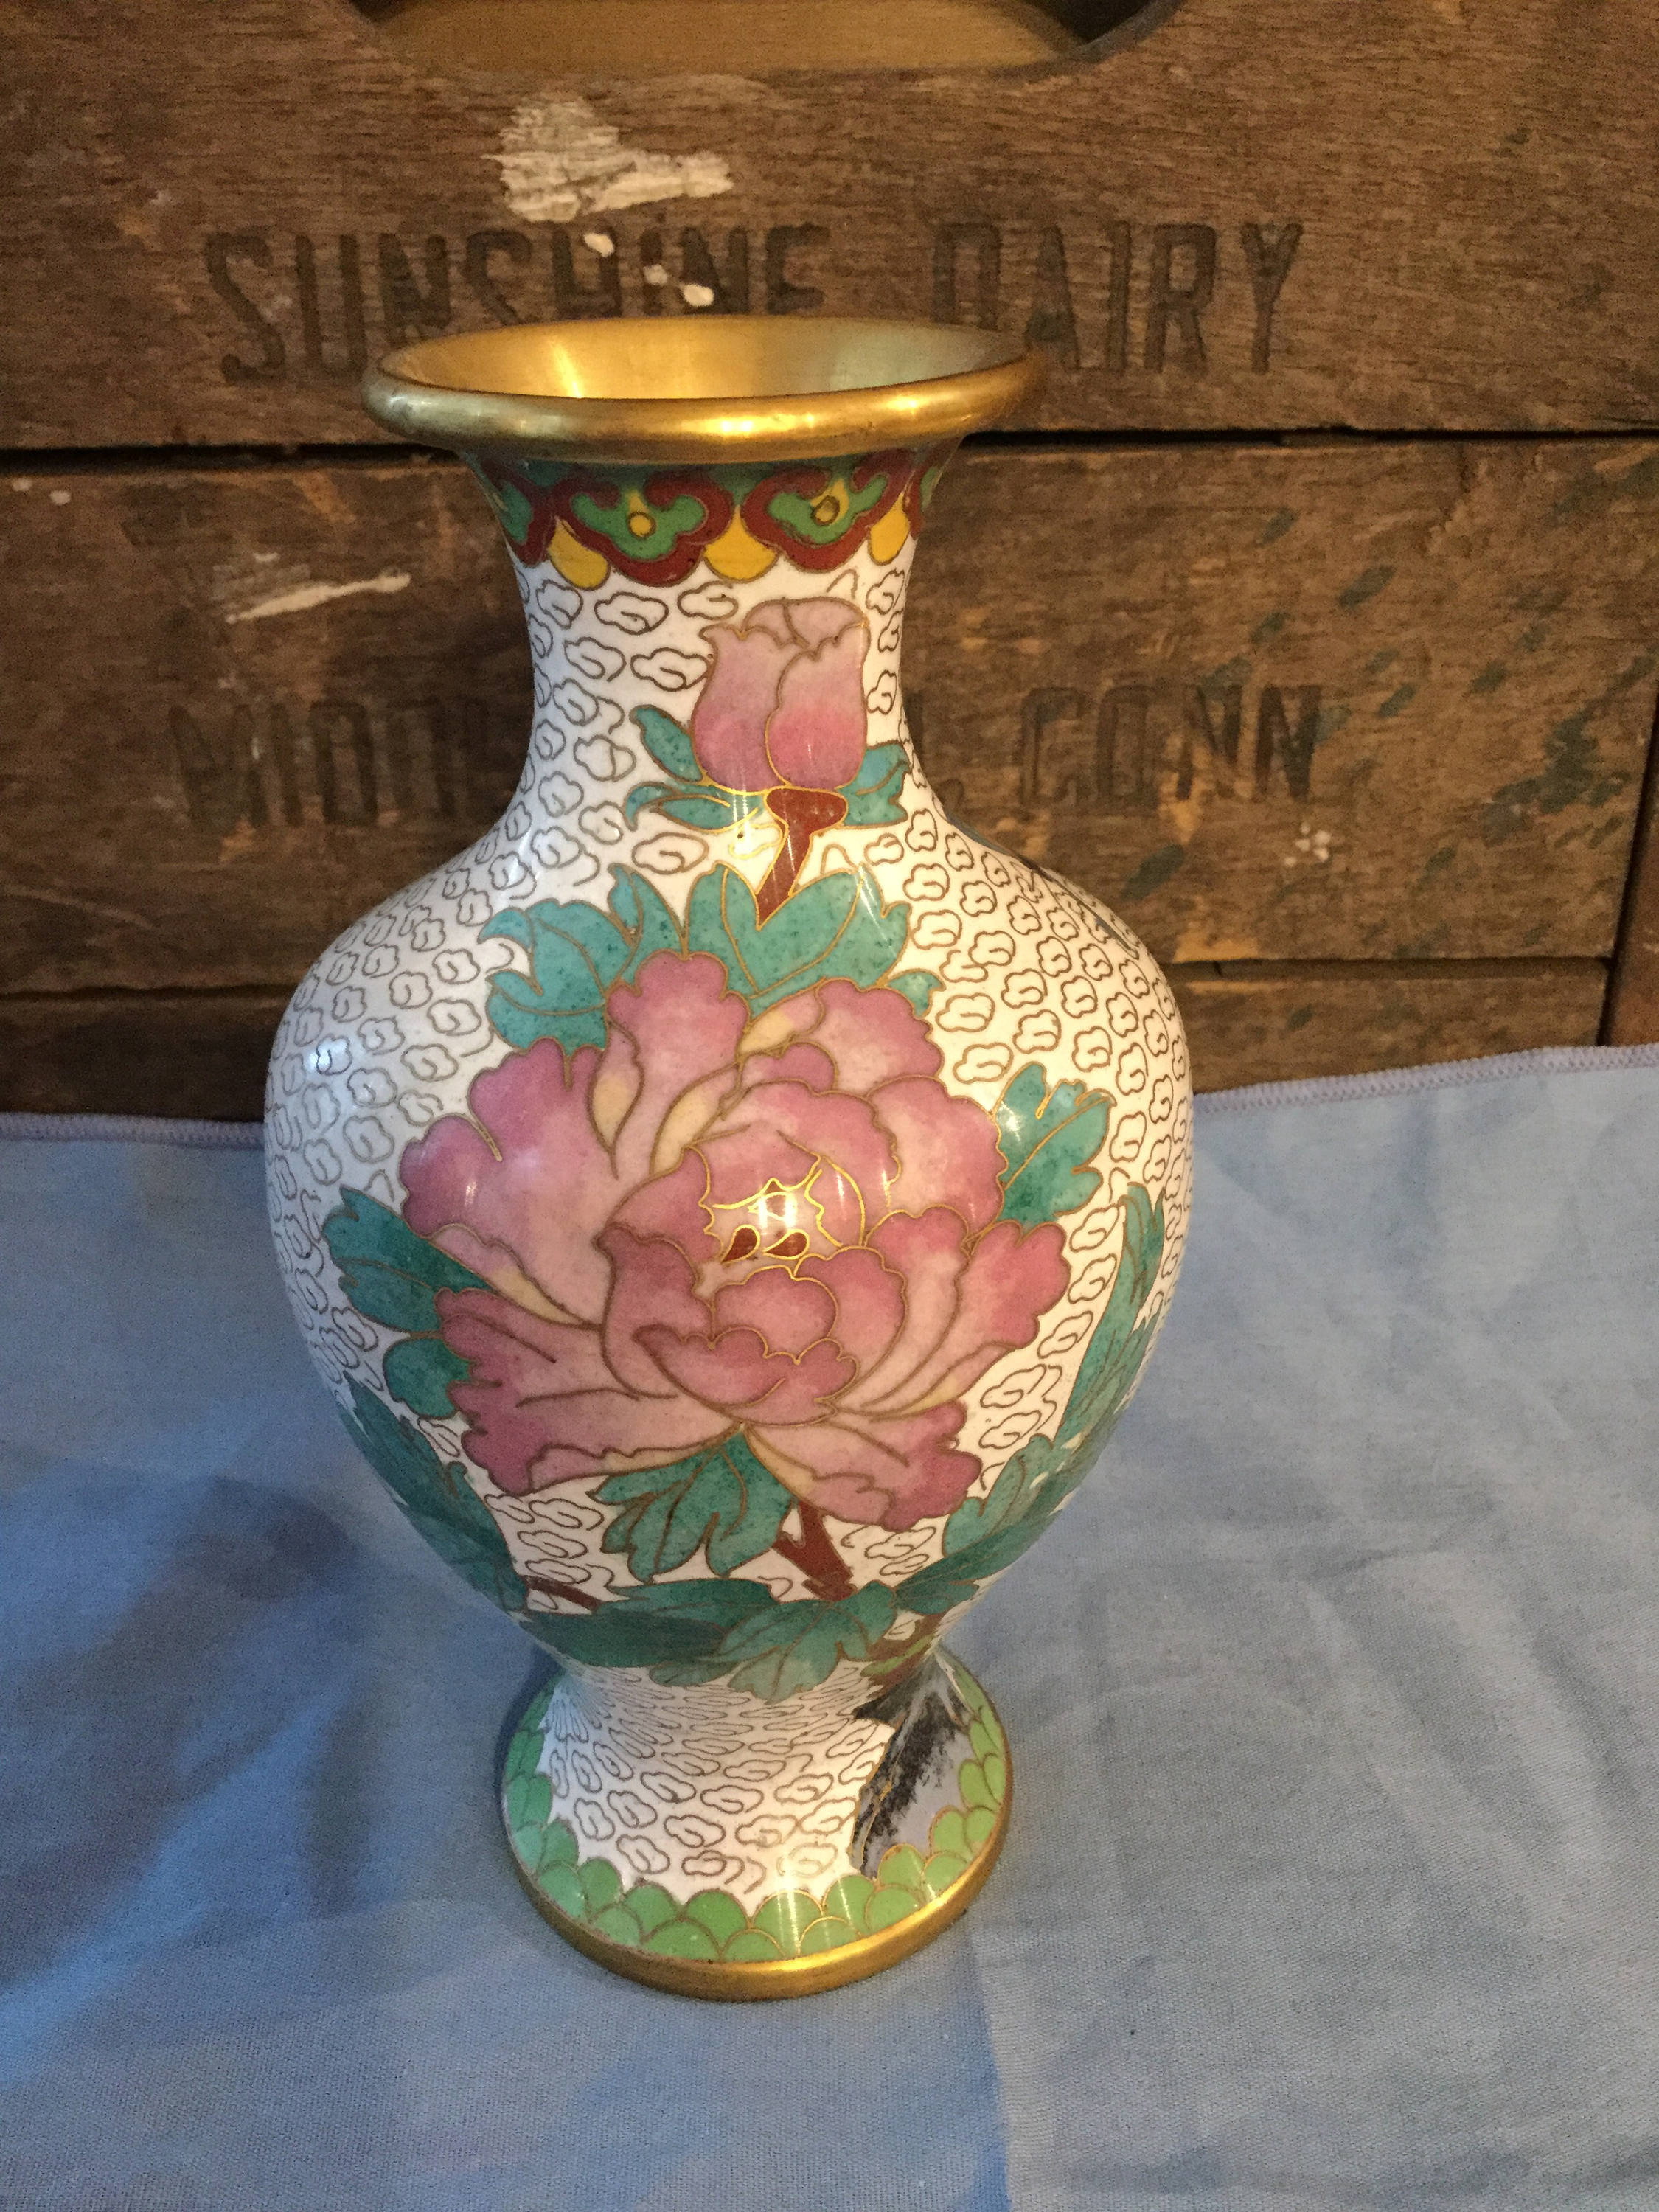 15 Amazing Royal Doulton Vases 1920 2024 free download royal doulton vases 1920 of antique chinese 1920s cloisonna vase in cream with etsy regarding dc29fc294c28ezoom